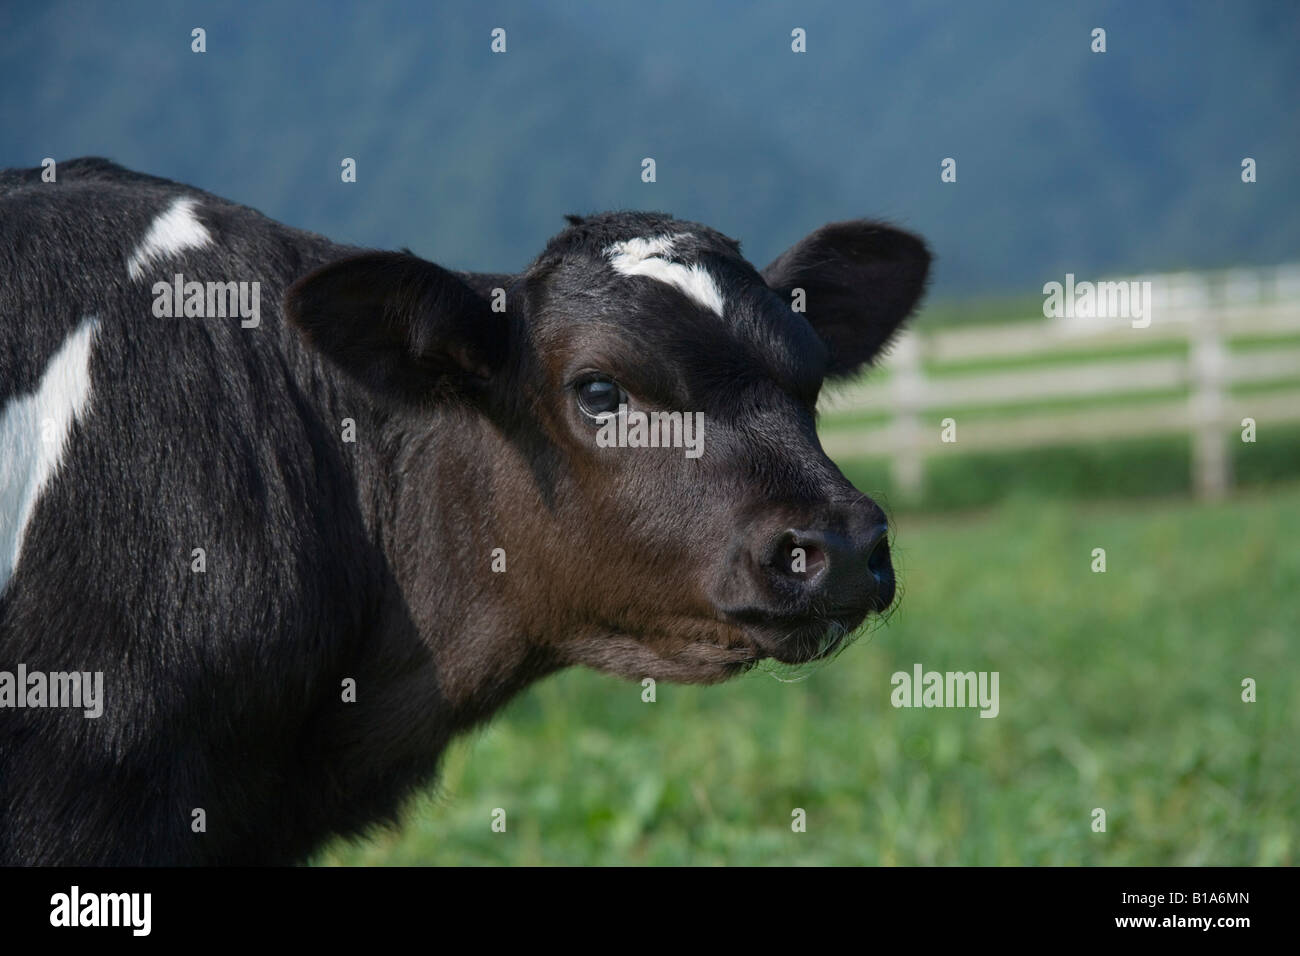 Cow standing in farm Banque D'Images